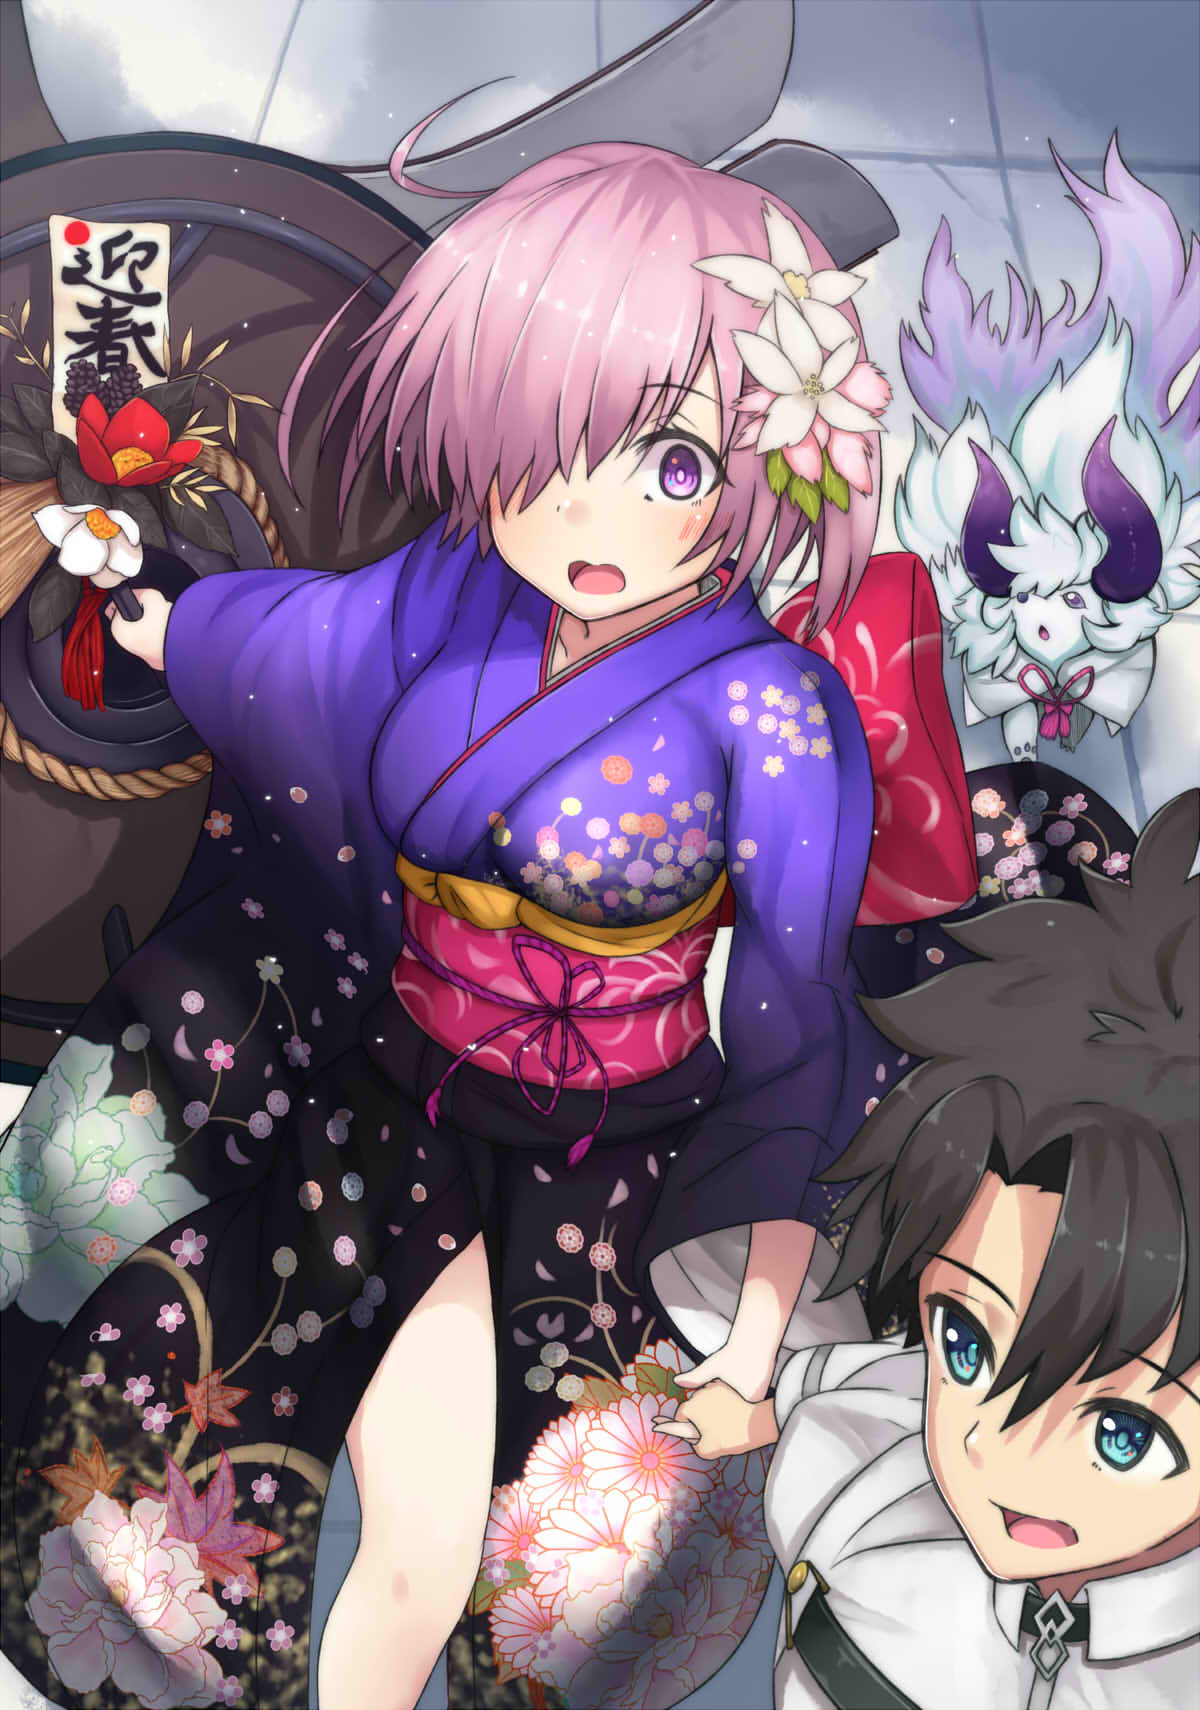 1boy 1girl 3: bangs beriko_(dotera_house) black_hair black_kimono blue_eyes blush breasts charm_(object) d: eyebrows_visible_through_hair fou_(fate/grand_order) fujimaru_ritsuka_(male) furisode gradient_clothes hair_over_one_eye hand_holding highres holding_shield japanese_clothes kimono large_breasts obi open_mouth parted_bangs purple_hair purple_kimono robe sash shield shielder_(fate/grand_order) short_hair tile_floor tiles violet_eyes wide_sleeves